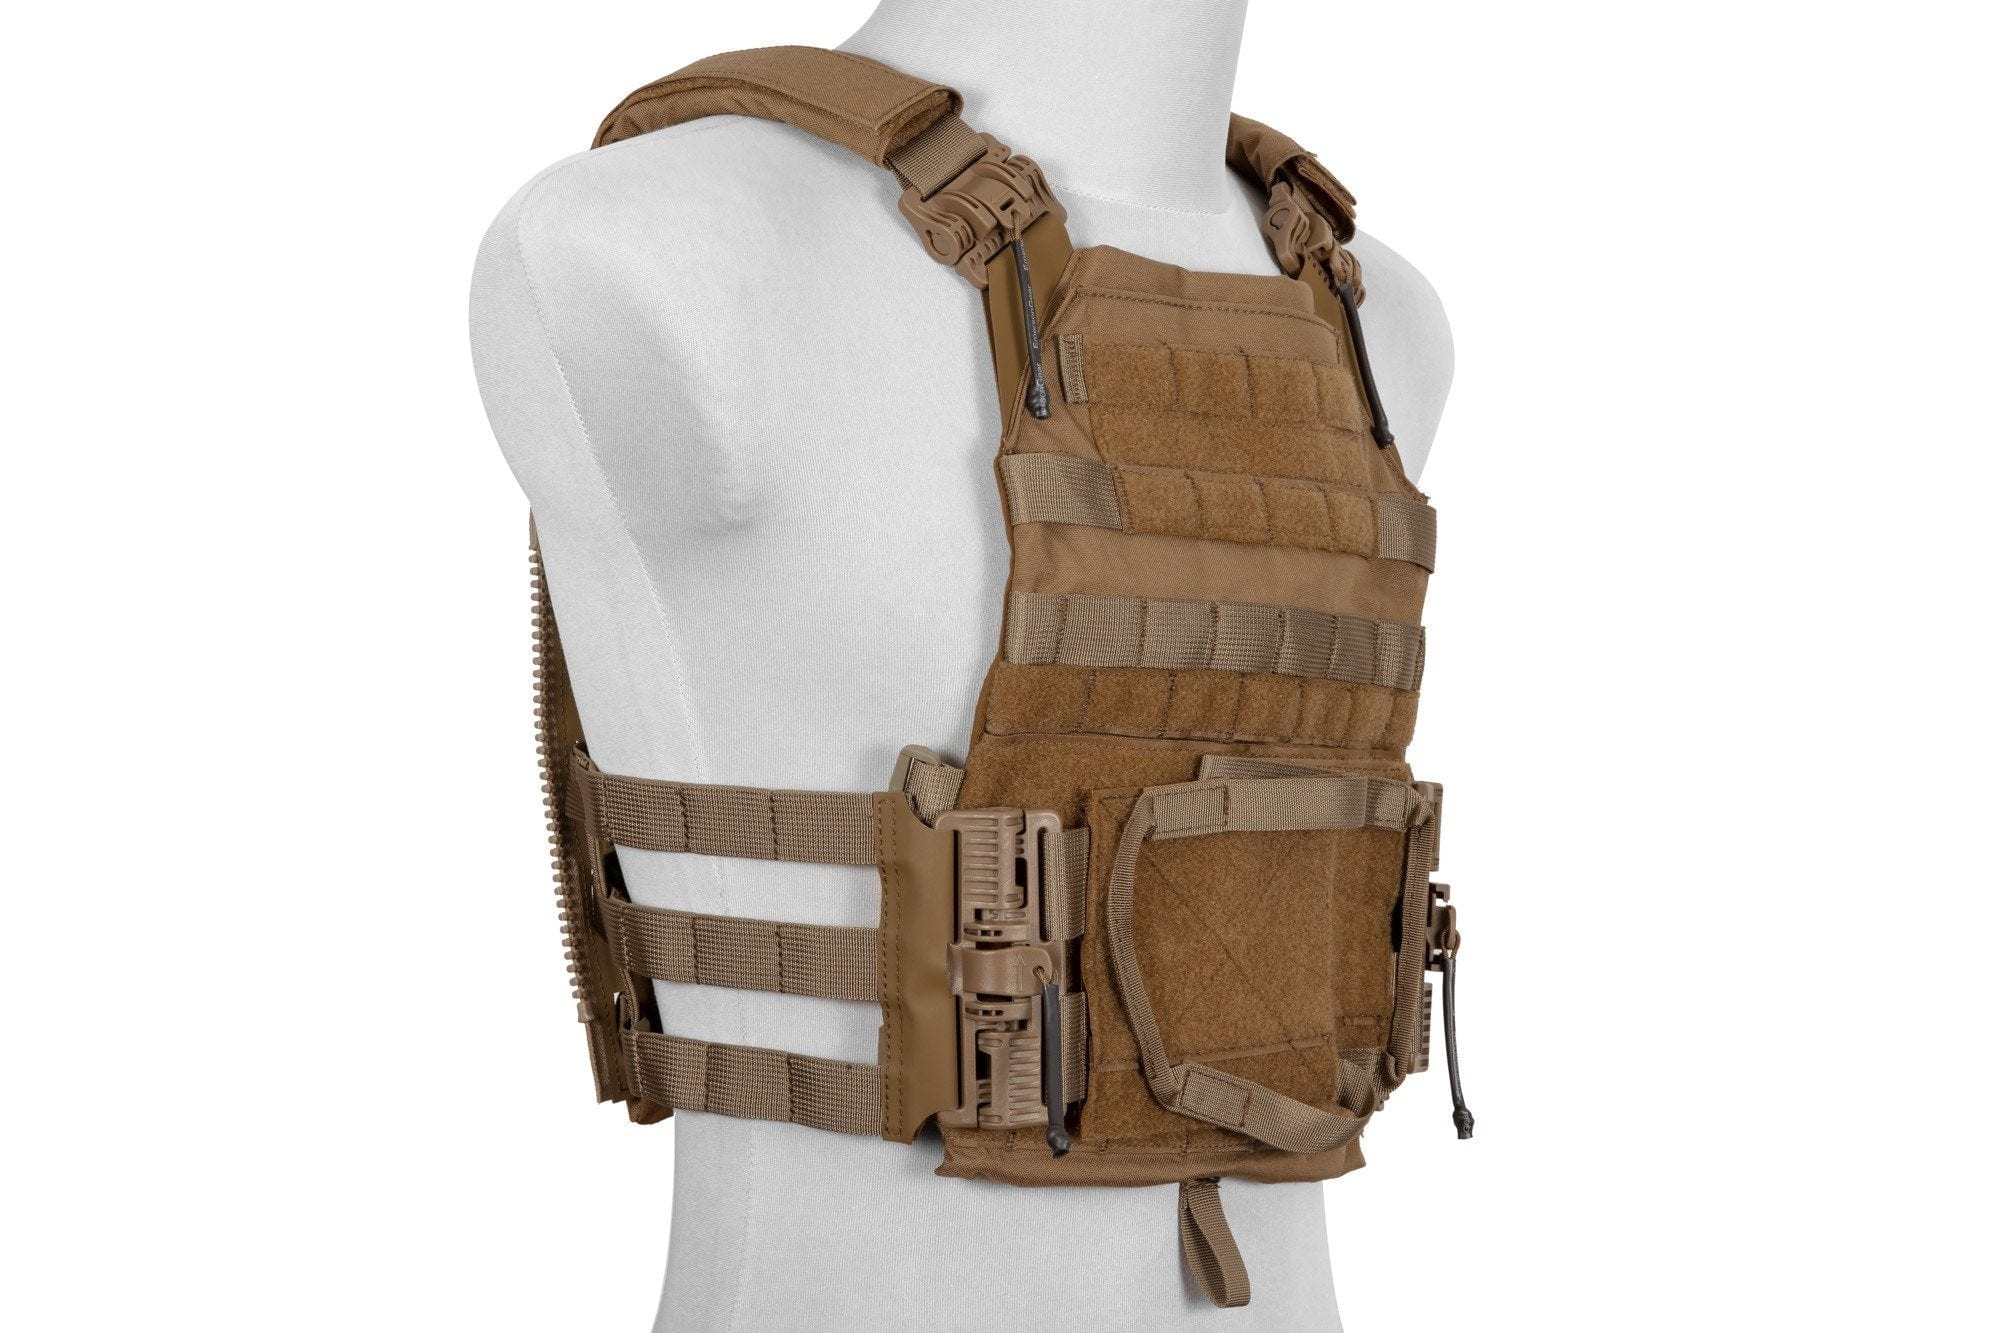 BlueLabel Quick Release Plate Carrier Jump 2.0 Vest - Coyote Brown by Emerson Gear on Airsoft Mania Europe